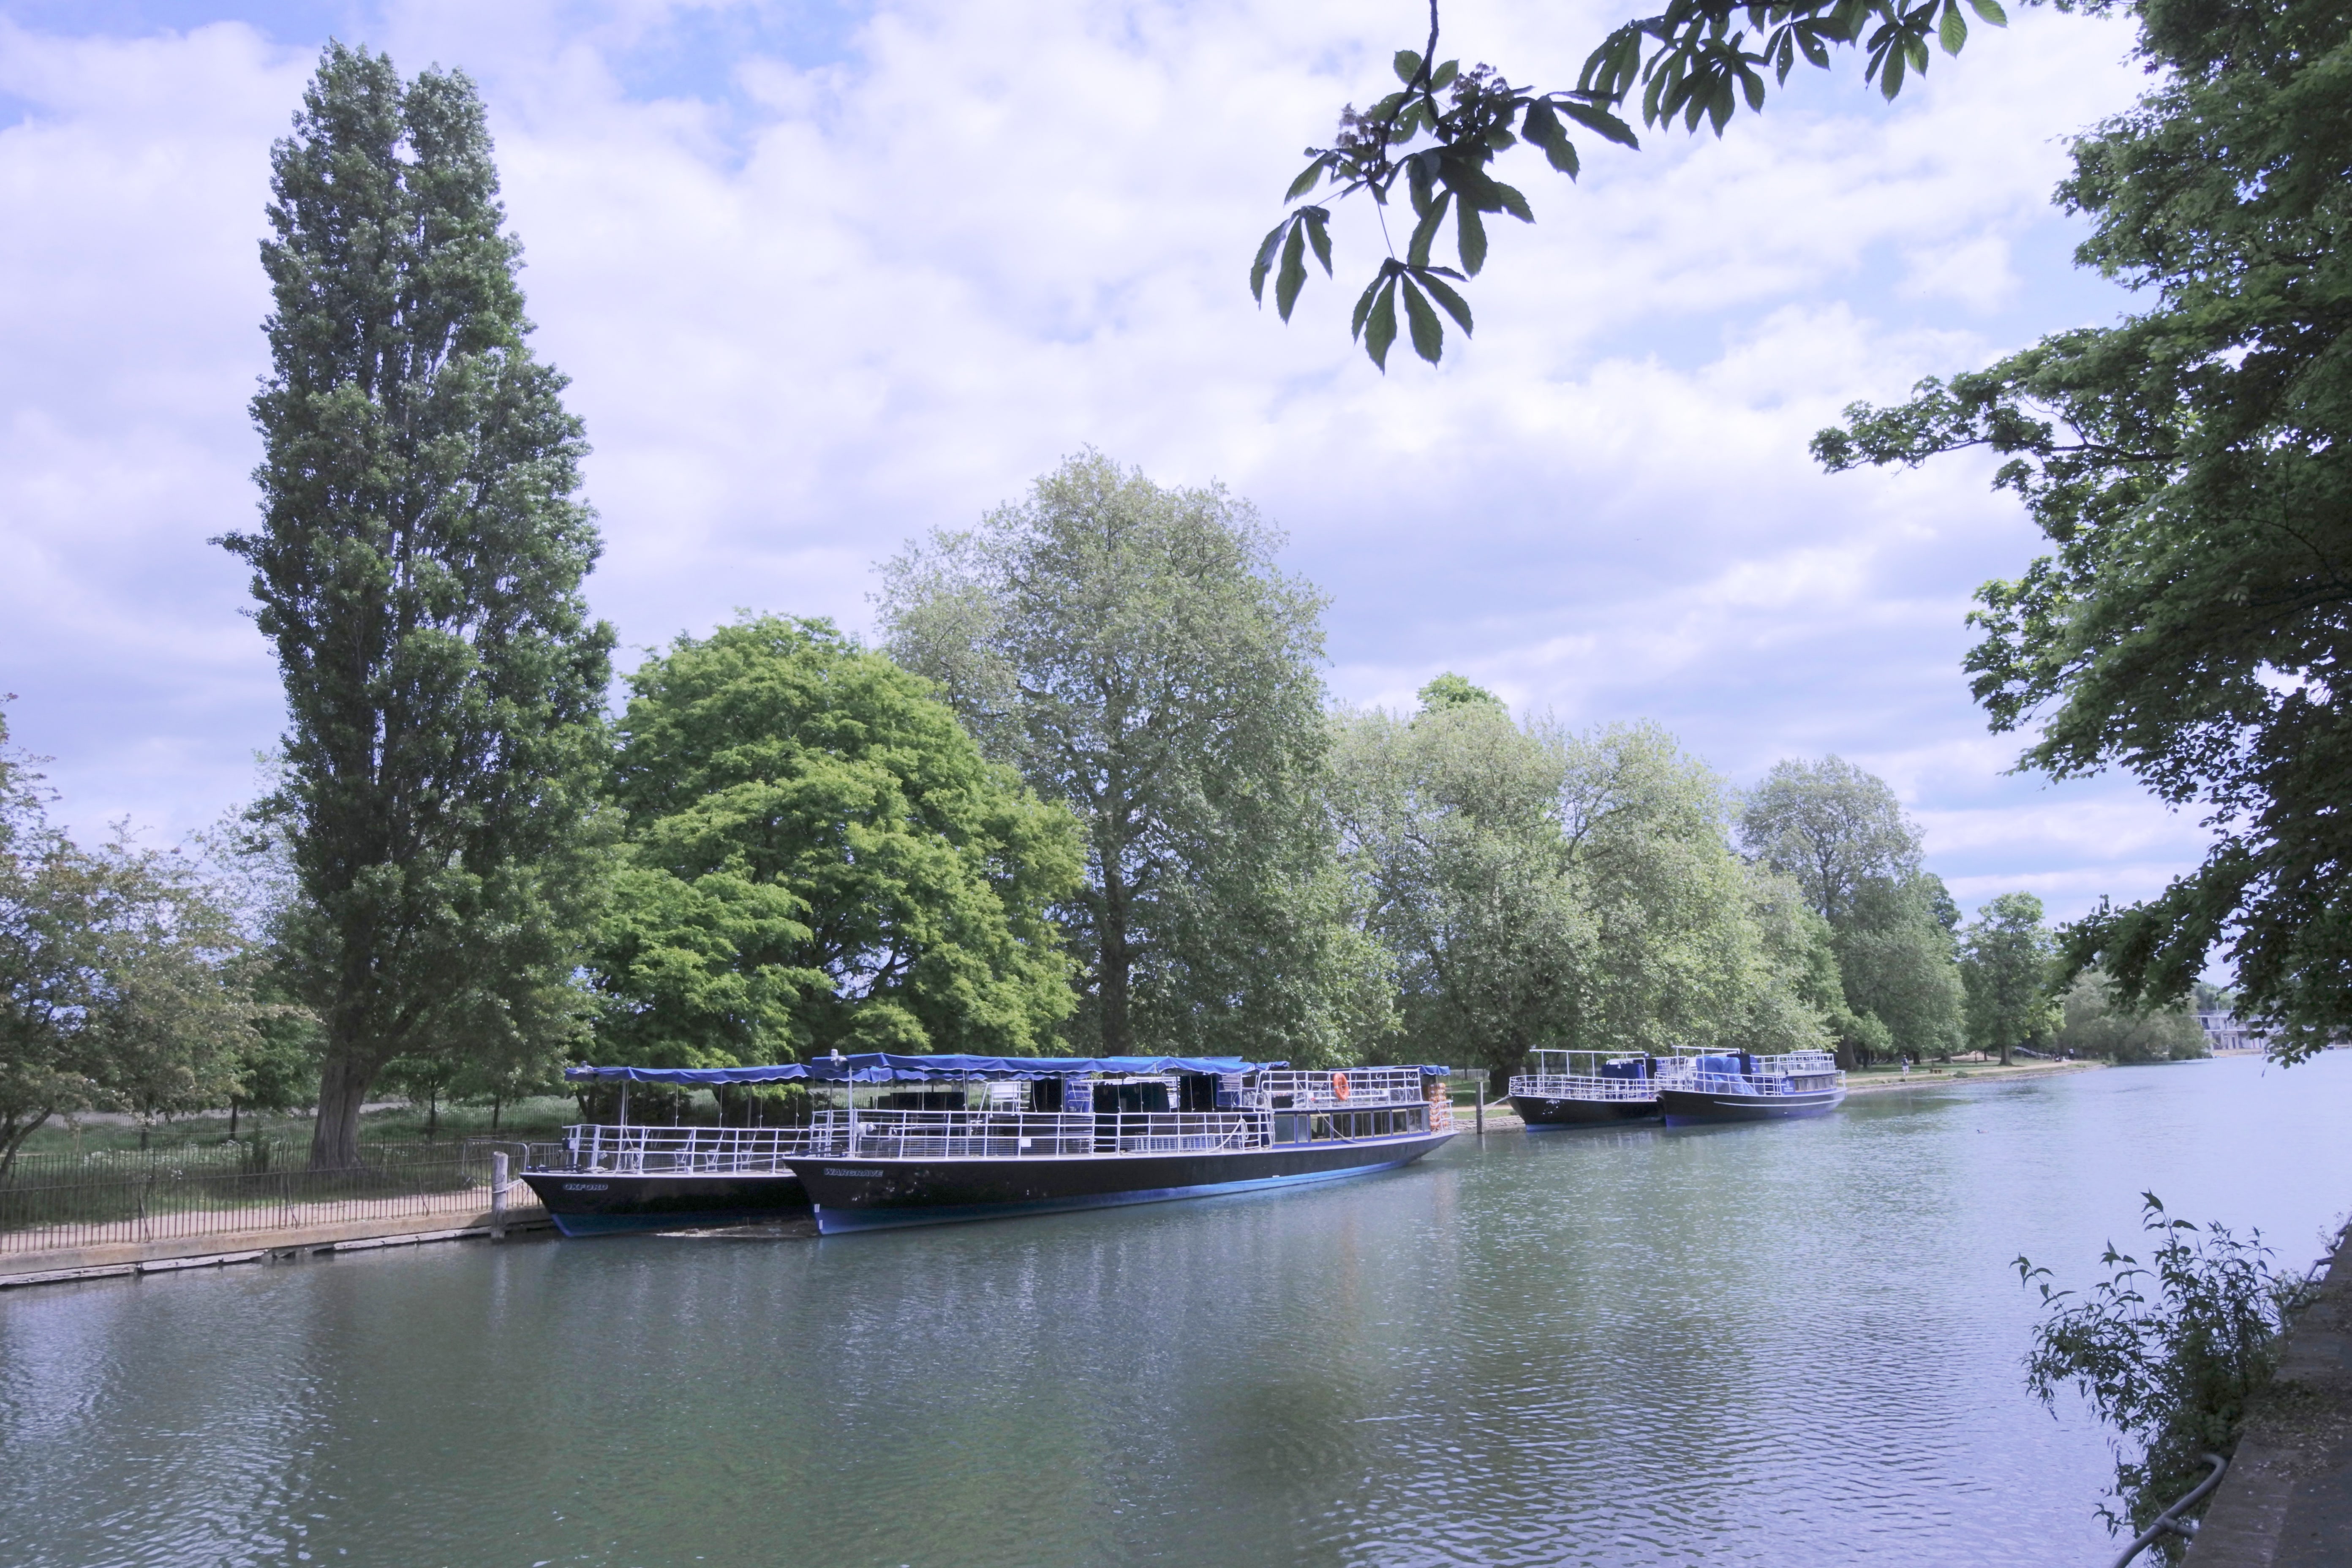 Some Salters boats tied up at Christ Church meadow.